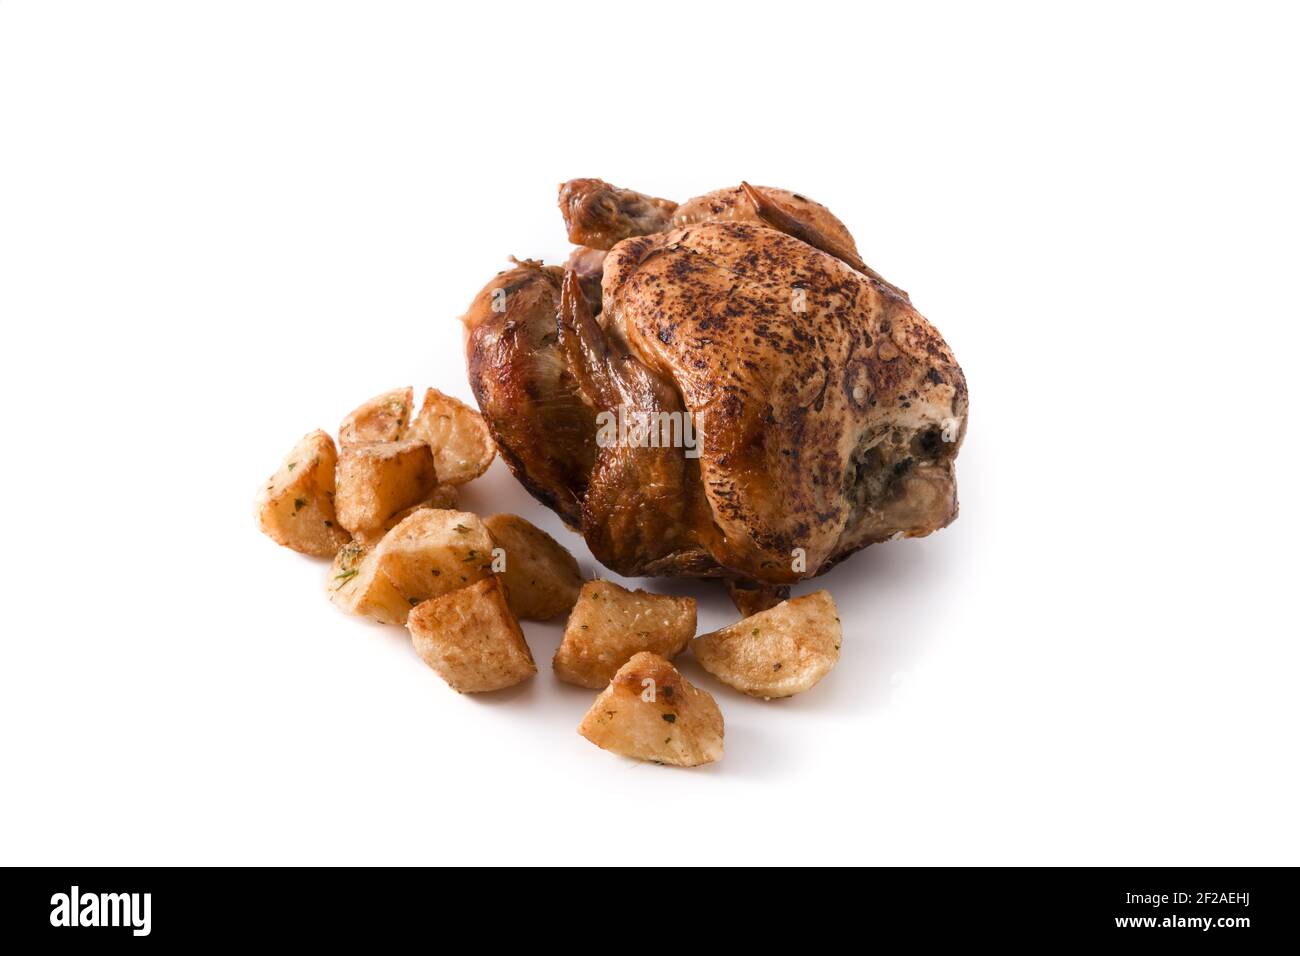 Homemade roasted chicken with potatoes isolated on white background Stock Photo